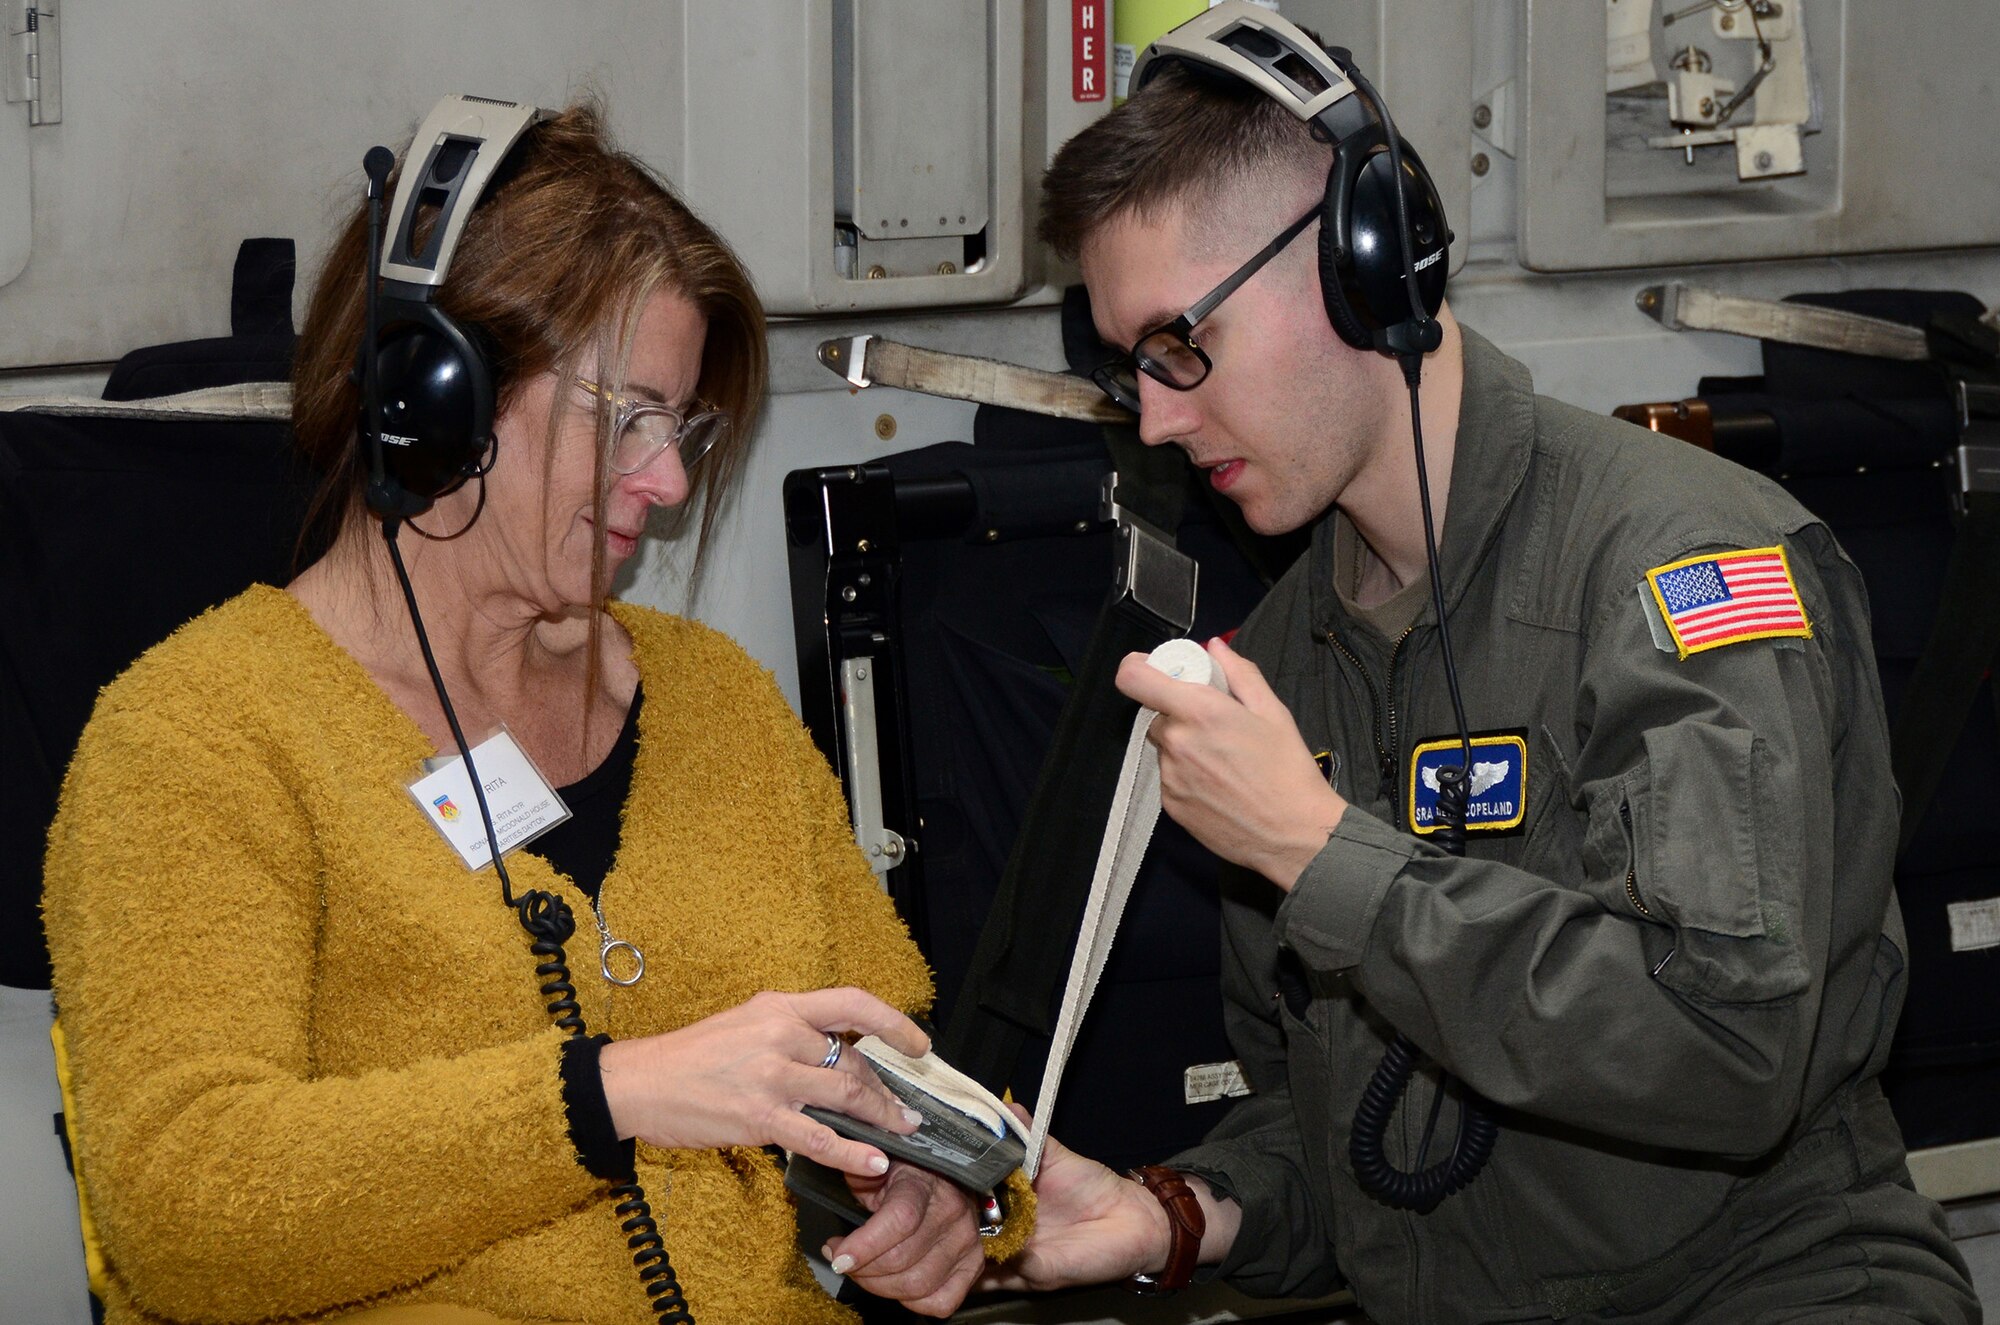 Senior Airman Devin Copeland, 445th Aeromedical Evacuation Squadron, puts a splint on volunteer Rita Cyr, CEO of Ronald McDonald House Charities Dayton, during a hands-on AES demonstration on board a 445th Airlift Wing C-17 Globemaster III during a civic leader tour flight to Colorado Springs Oct. 9, 2019. Nineteen Greater Dayton area civic leaders participated in a civic leader tour hosted by the 445th Airlift Wing Oct. 9-10 at both Peterson Air Force Base and the Air Force Academy in Colorado Springs, Colorado.